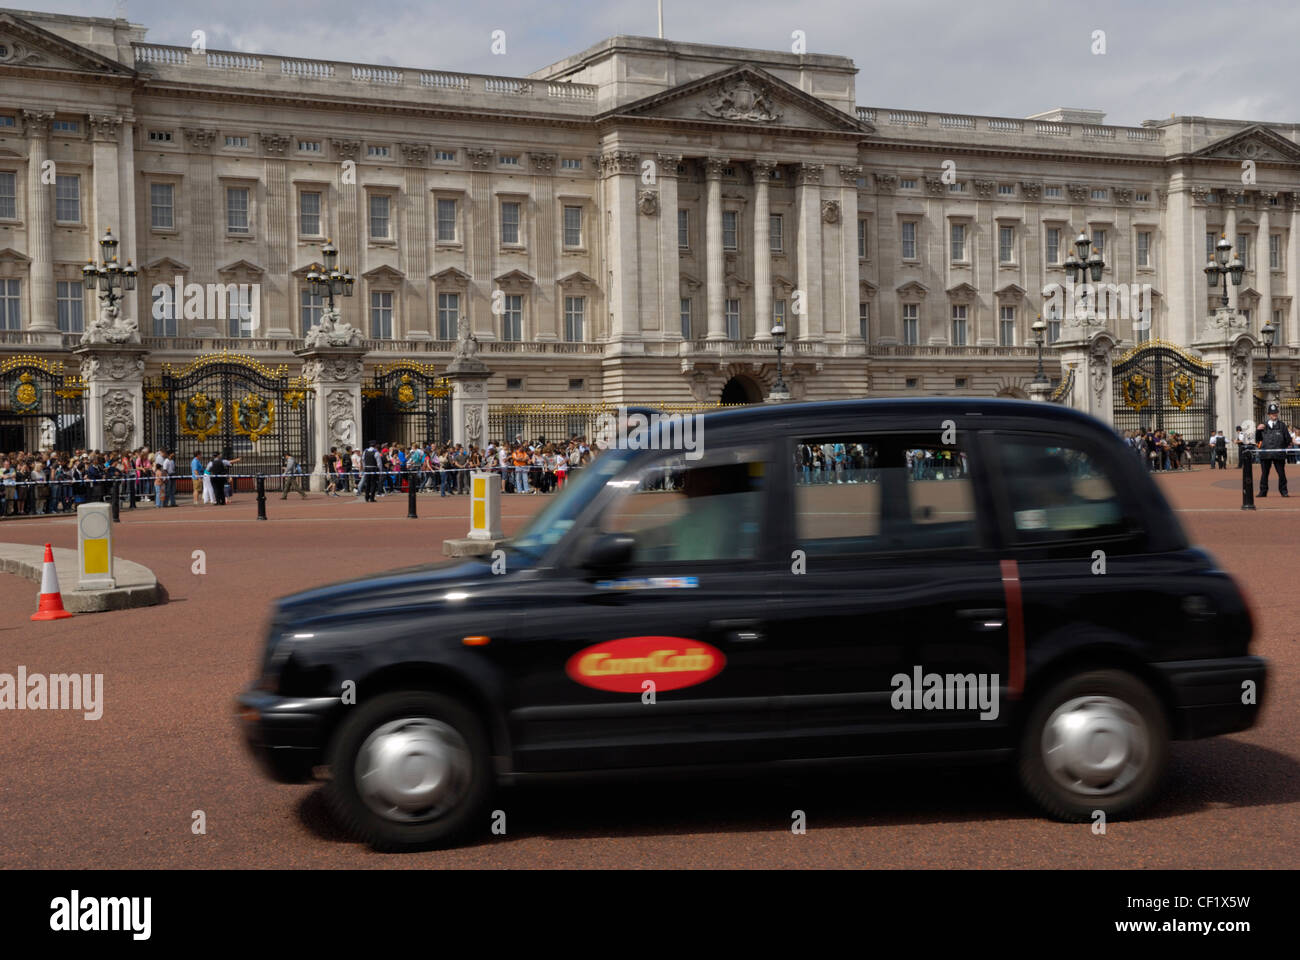 A London taxi passing the front of Buckingham Palace. Stock Photo